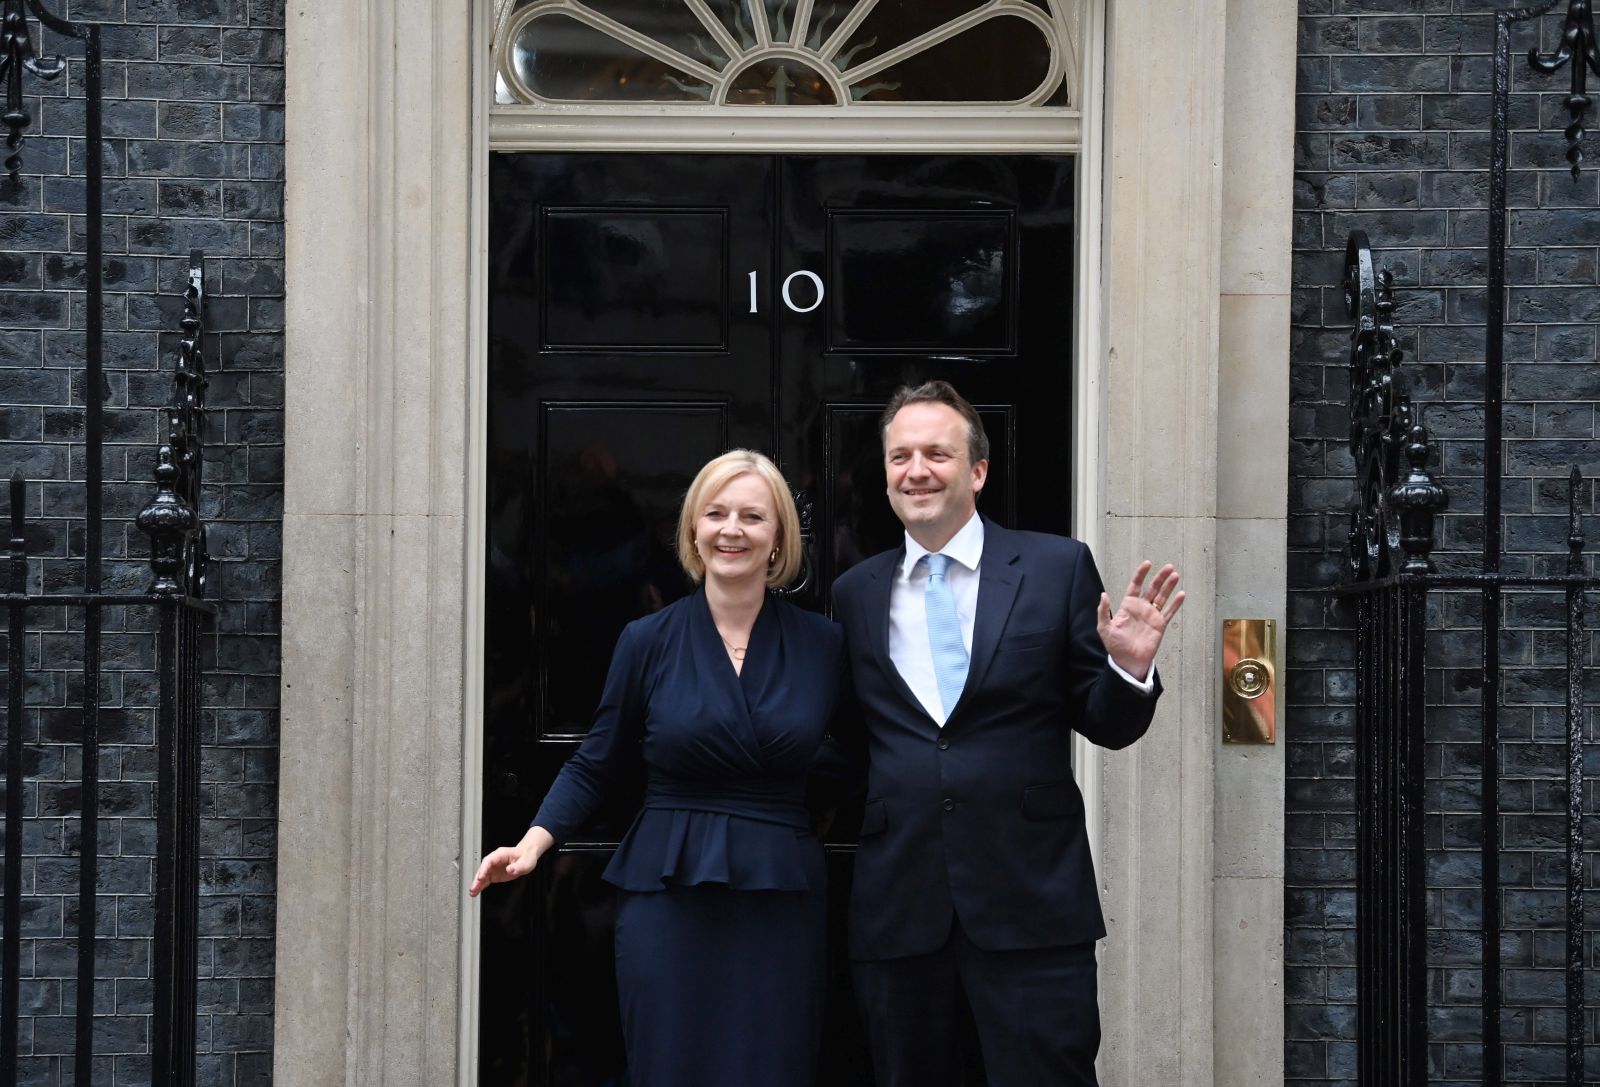 epa10164766 Britain's new Prime Minister Liz Truss with her husband Hugh O'Leary at Downing Street, London, Britain 06 September 2022. Truss has taken over as Prime Minister after travelling to Balmoral to see Queen Elizabeth II where she was invited to form a new government.  EPA/NEIL HALL